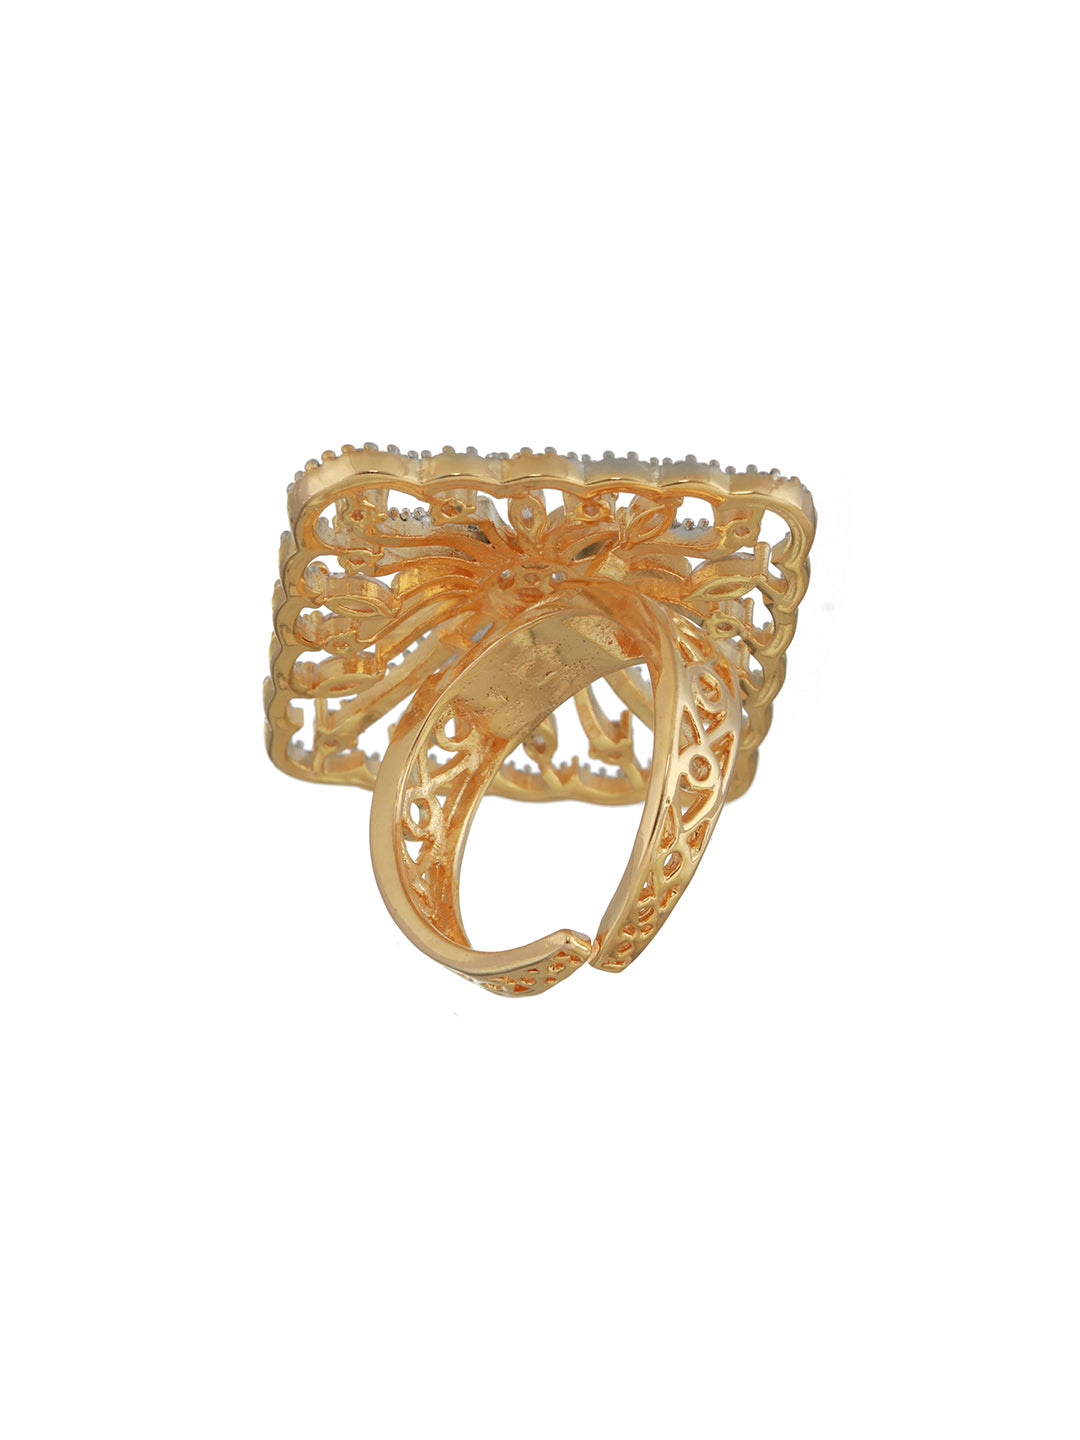 Sparkling Floral Block American Diamond Gold-Plated Cocktail Ring